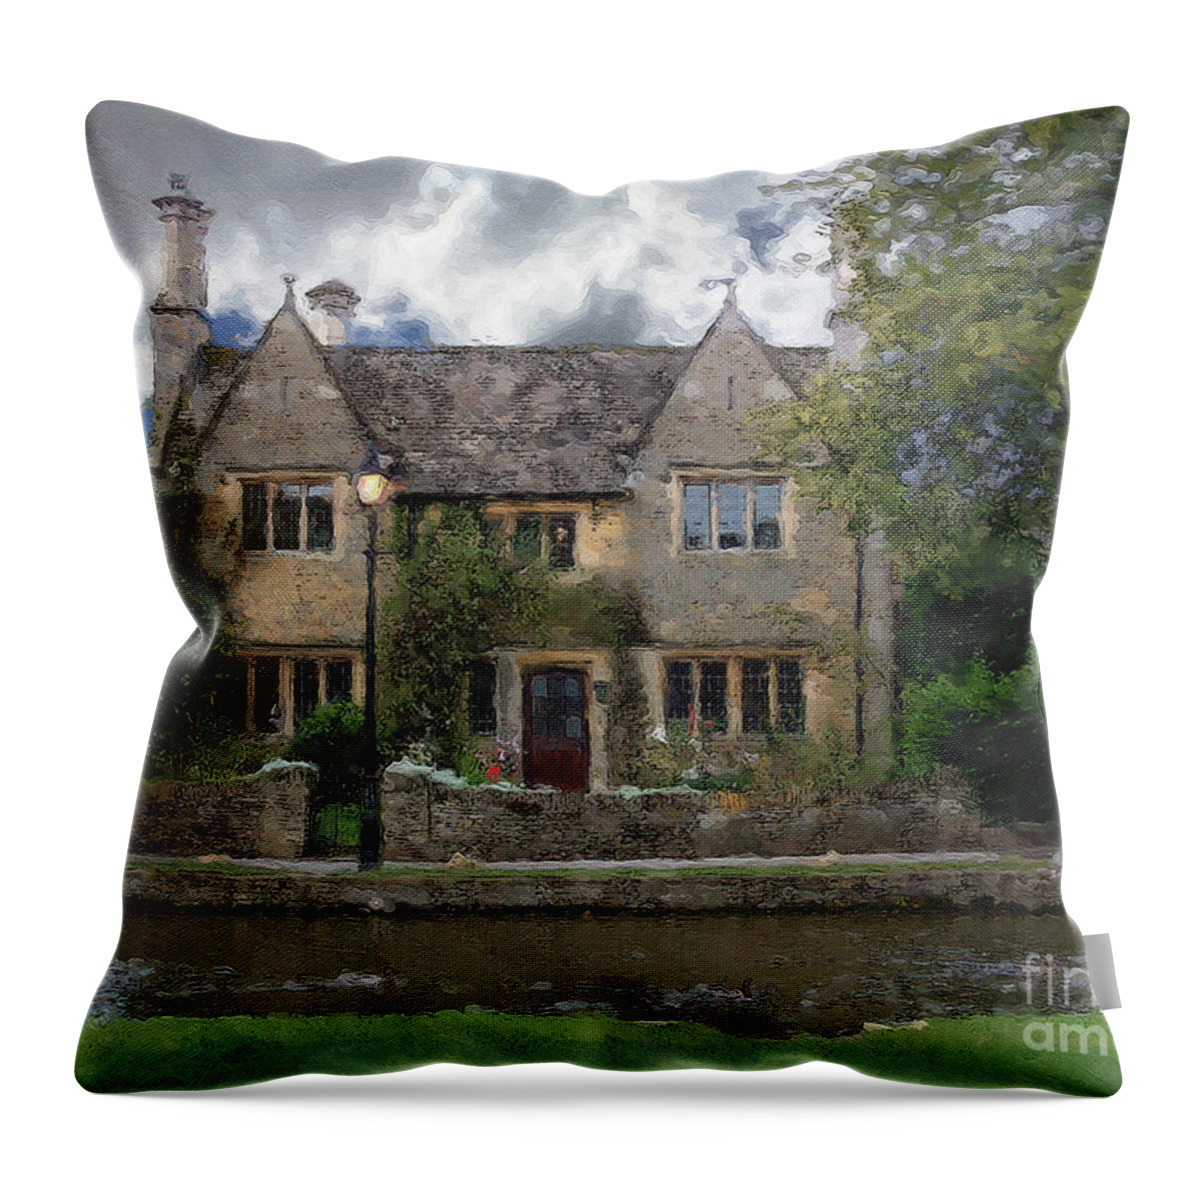 Bourton-on-the-water Throw Pillow featuring the photograph Along the Water in Bourton by Brian Watt